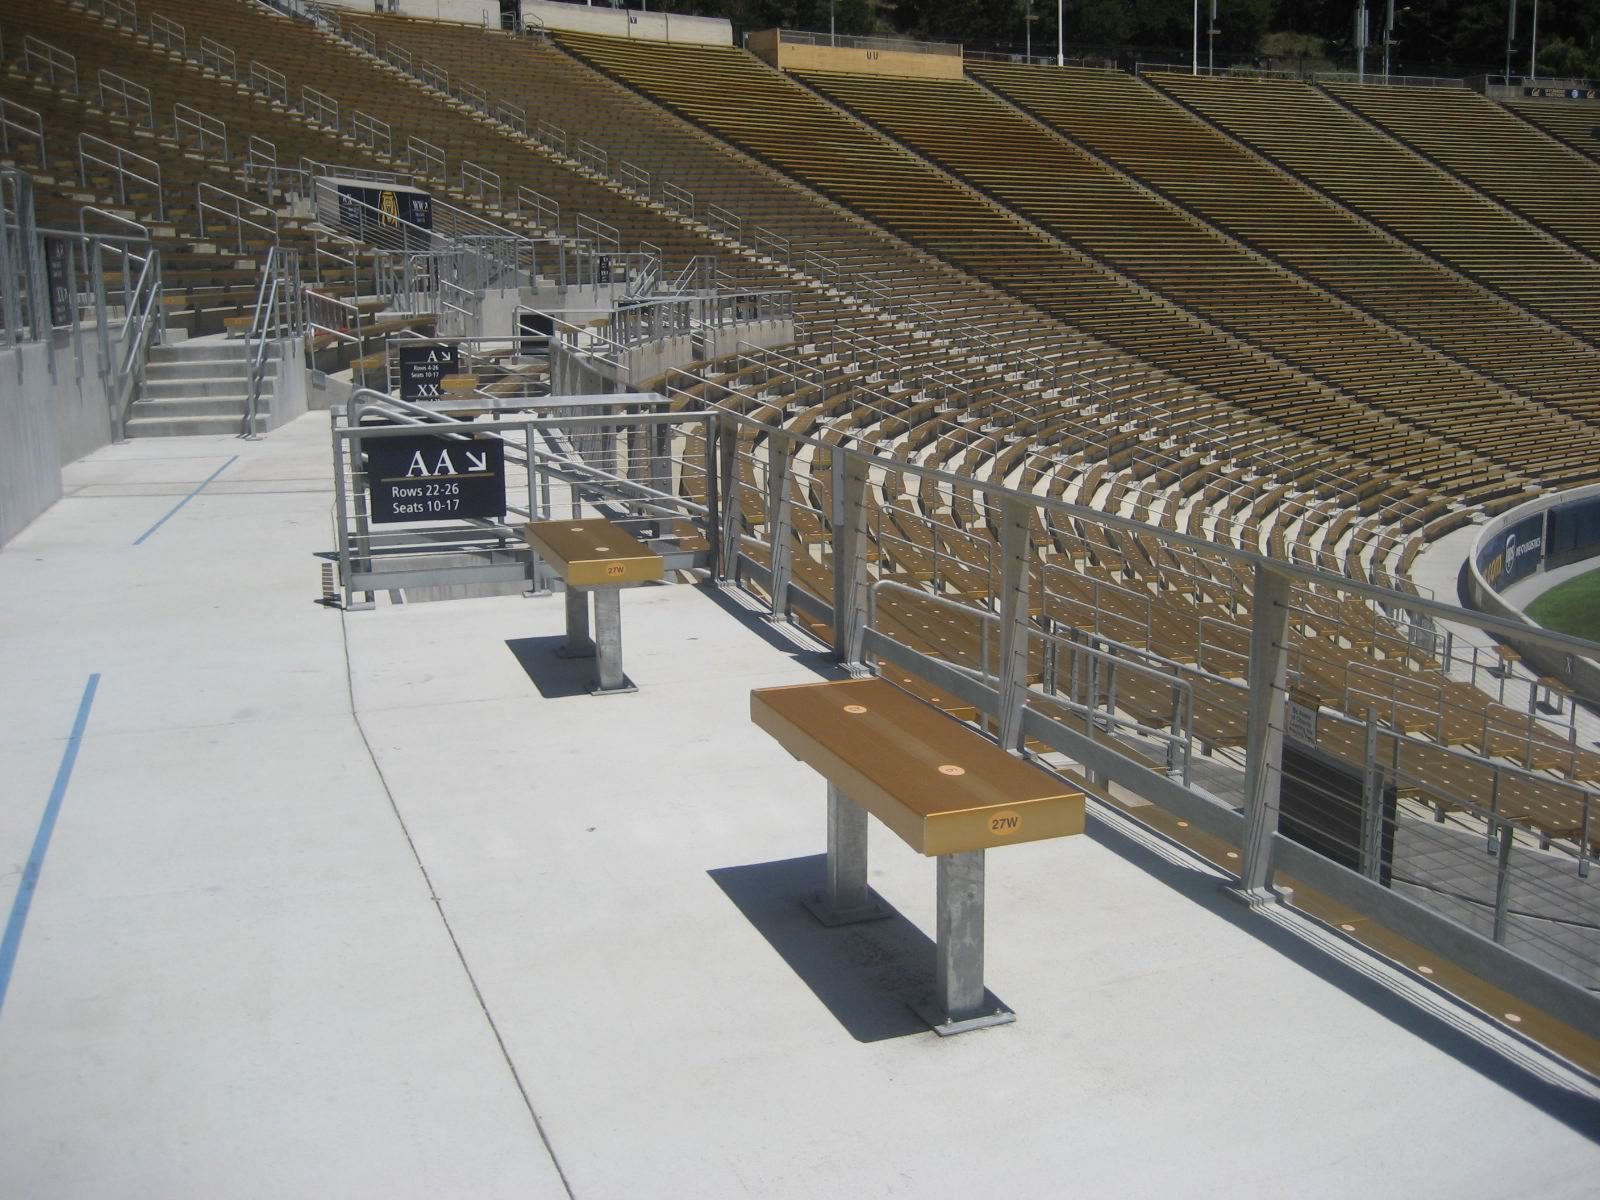 Accessible seats in Section AA